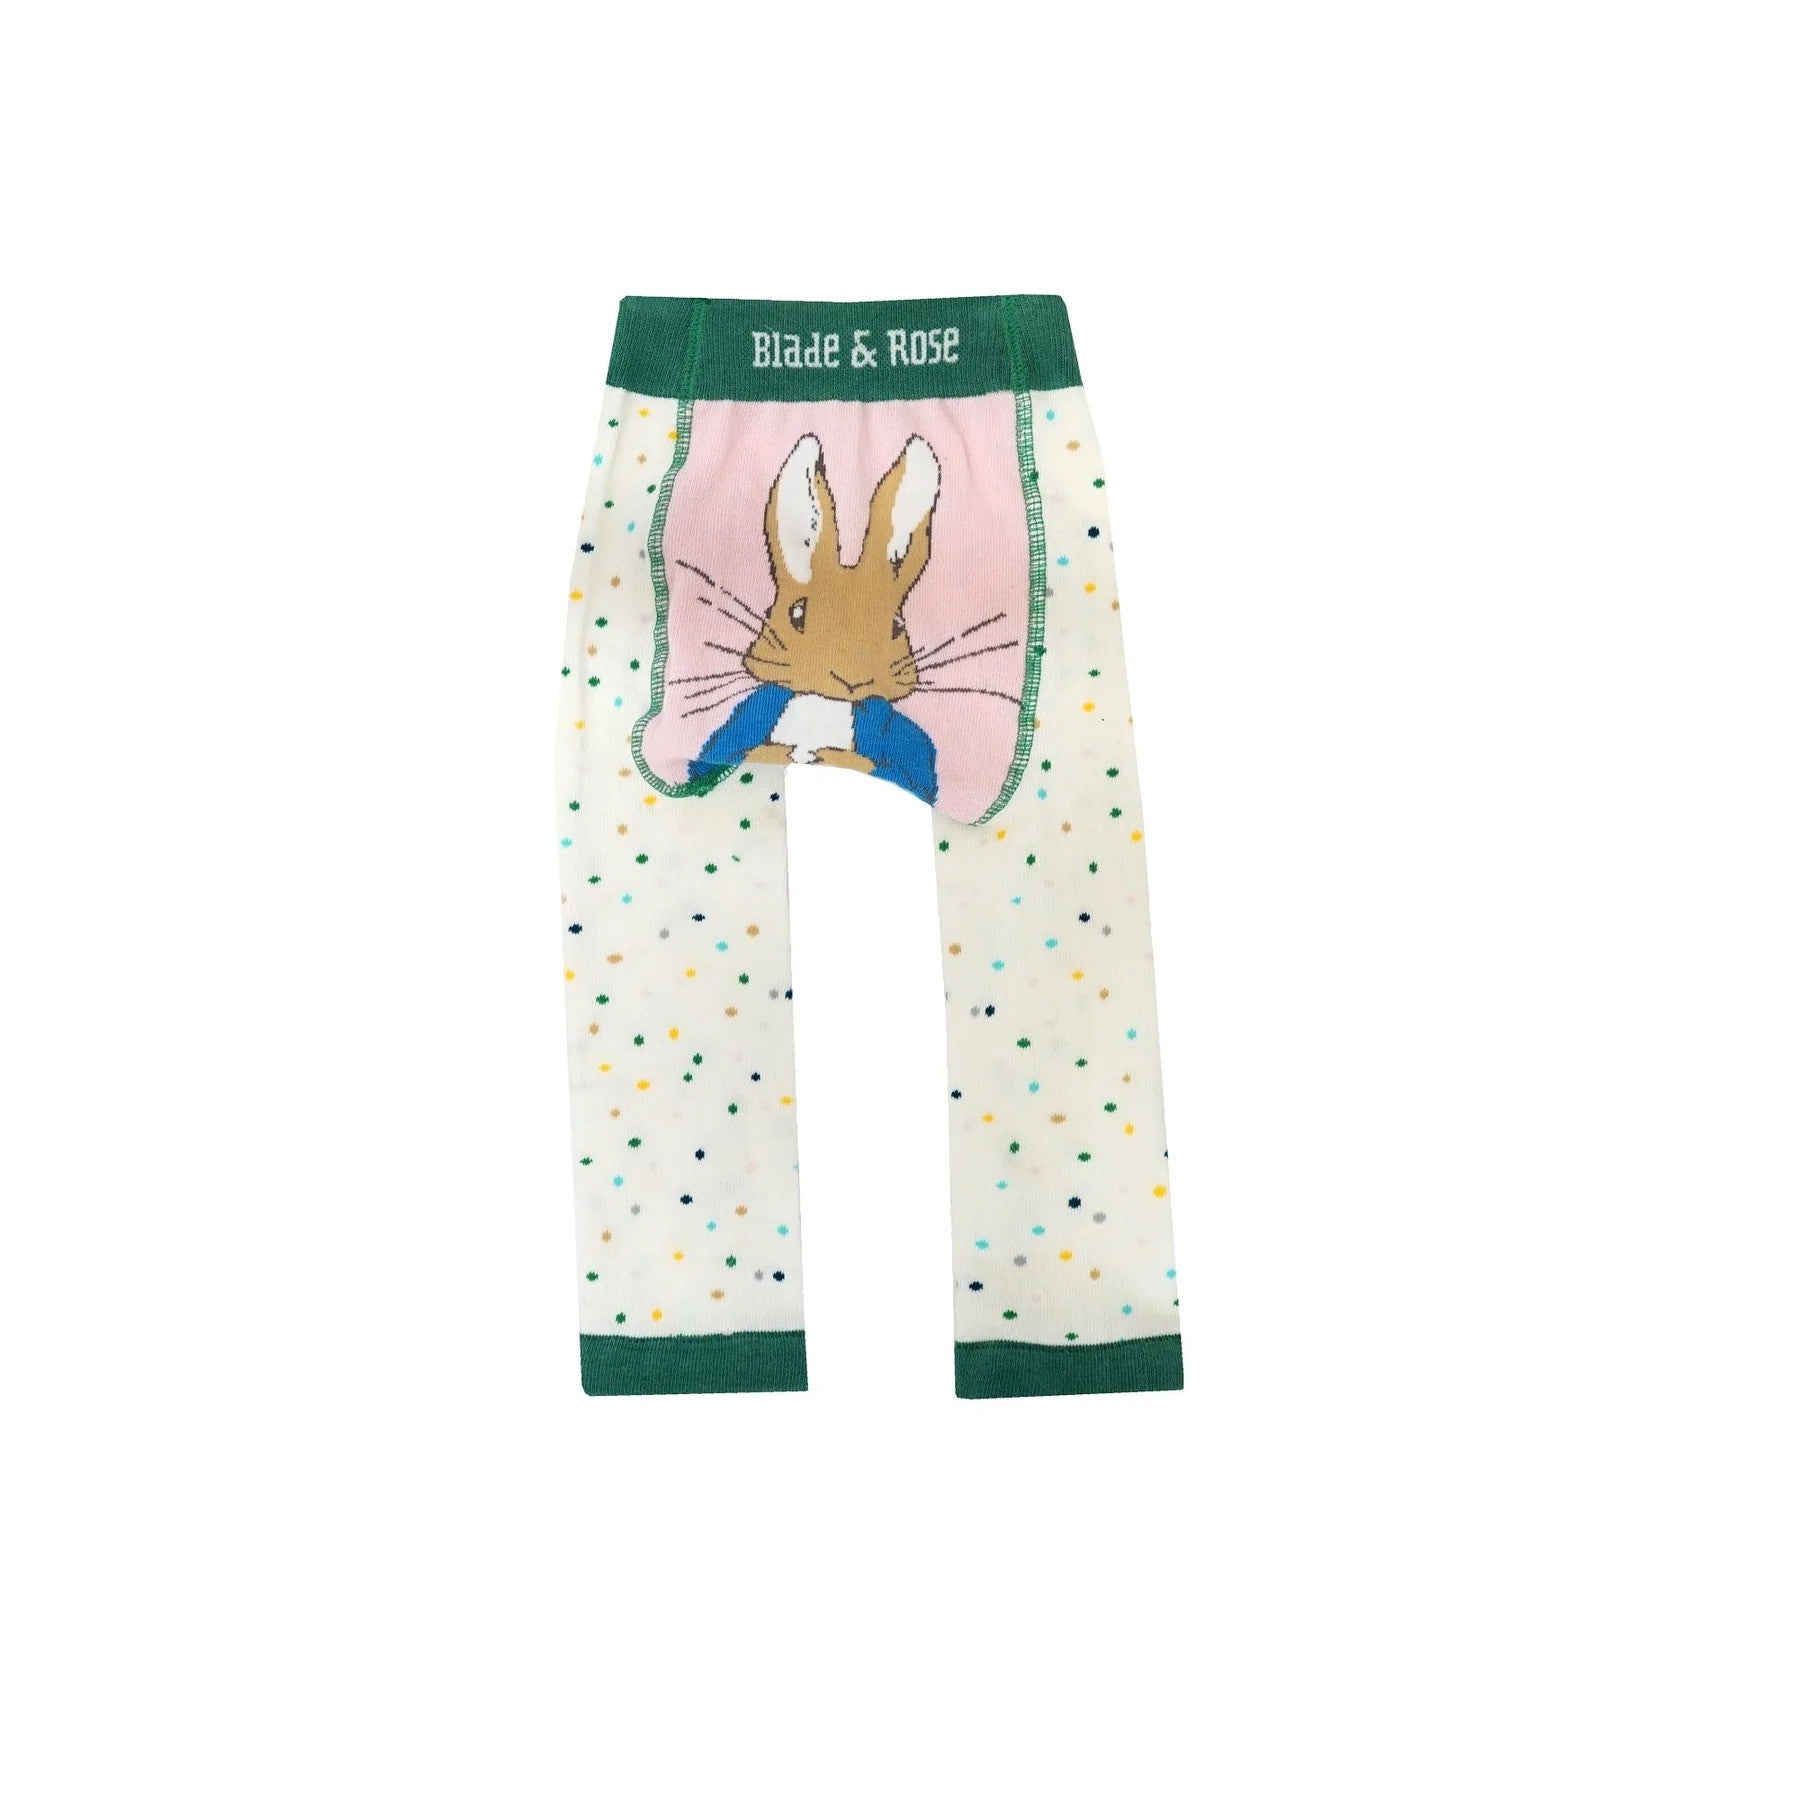 White leggings with a colourful dotty pattern and green accents